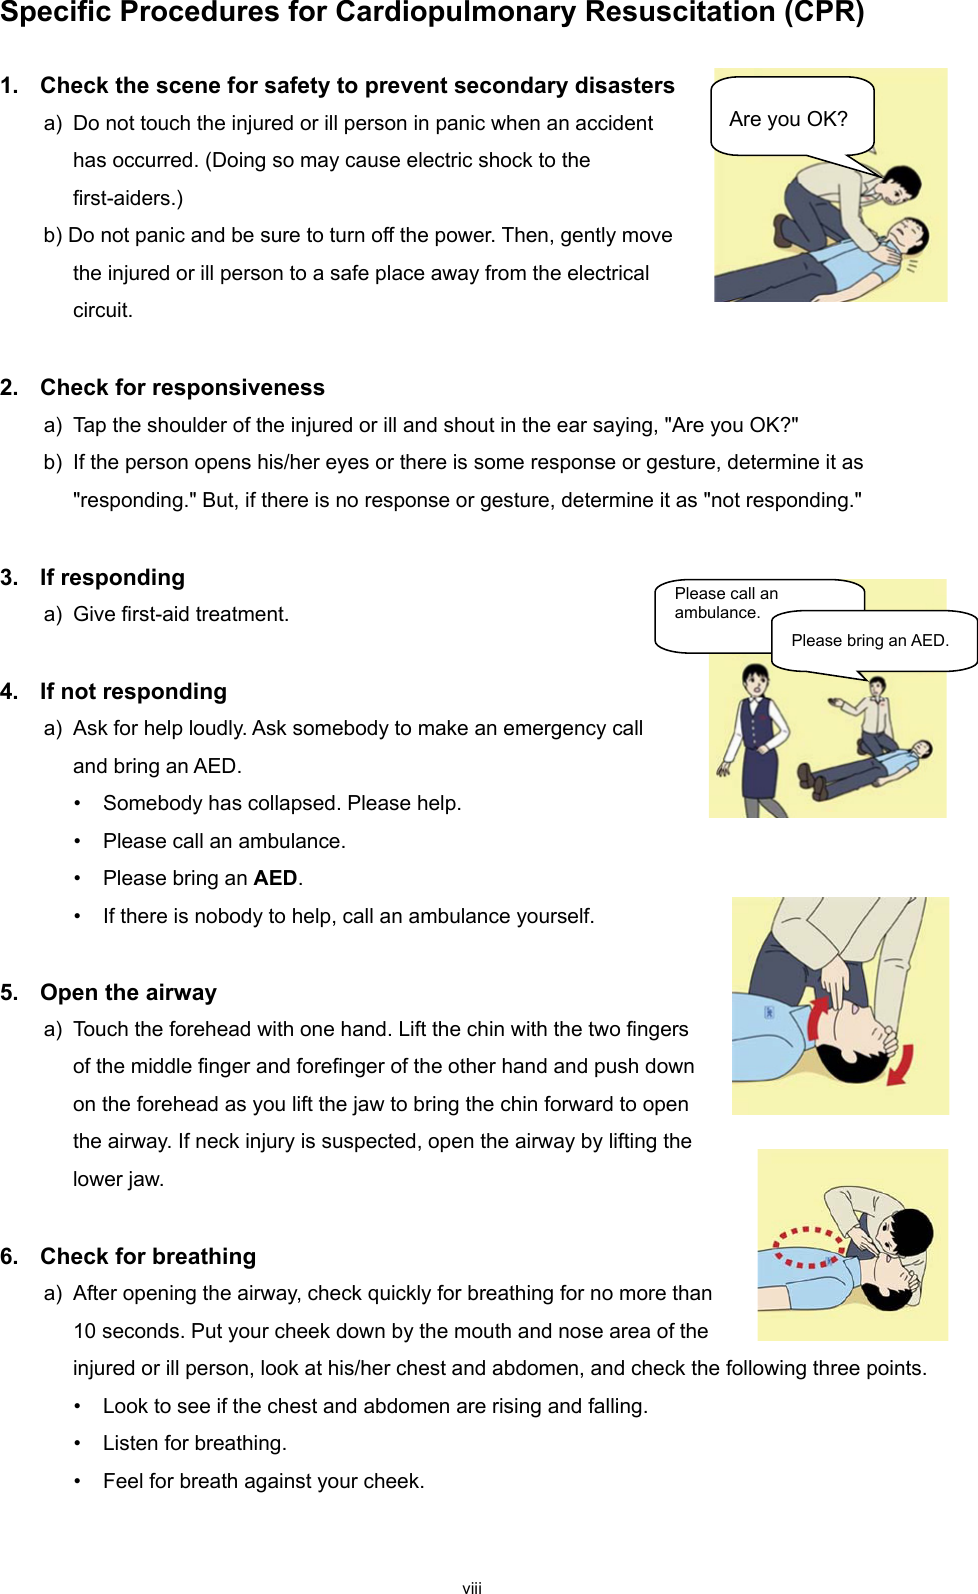 viii Specific Procedures for Cardiopulmonary Resuscitation (CPR)  1.  Check the scene for safety to prevent secondary disasters a) Do not touch the injured or ill person in panic when an accident has occurred. (Doing so may cause electric shock to the first-aiders.) b) Do not panic and be sure to turn off the power. Then, gently move the injured or ill person to a safe place away from the electrical circuit.  2.  Check for responsiveness a) Tap the shoulder of the injured or ill and shout in the ear saying, &quot;Are you OK?&quot; b)  If the person opens his/her eyes or there is some response or gesture, determine it as &quot;responding.&quot; But, if there is no response or gesture, determine it as &quot;not responding.&quot;  3.  If responding a) Give first-aid treatment.  4.  If not responding a) Ask for help loudly. Ask somebody to make an emergency call and bring an AED. • Somebody has collapsed. Please help. • Please call an ambulance. • Please bring an AED. • If there is nobody to help, call an ambulance yourself.  5.  Open the airway a) Touch the forehead with one hand. Lift the chin with the two fingers of the middle finger and forefinger of the other hand and push down on the forehead as you lift the jaw to bring the chin forward to open the airway. If neck injury is suspected, open the airway by lifting the lower jaw.  6.  Check for breathing a) After opening the airway, check quickly for breathing for no more than 10 seconds. Put your cheek down by the mouth and nose area of the injured or ill person, look at his/her chest and abdomen, and check the following three points. • Look to see if the chest and abdomen are rising and falling. • Listen for breathing. • Feel for breath against your cheek.  Are you OK? Please call an ambulance. Please bring an AED. 